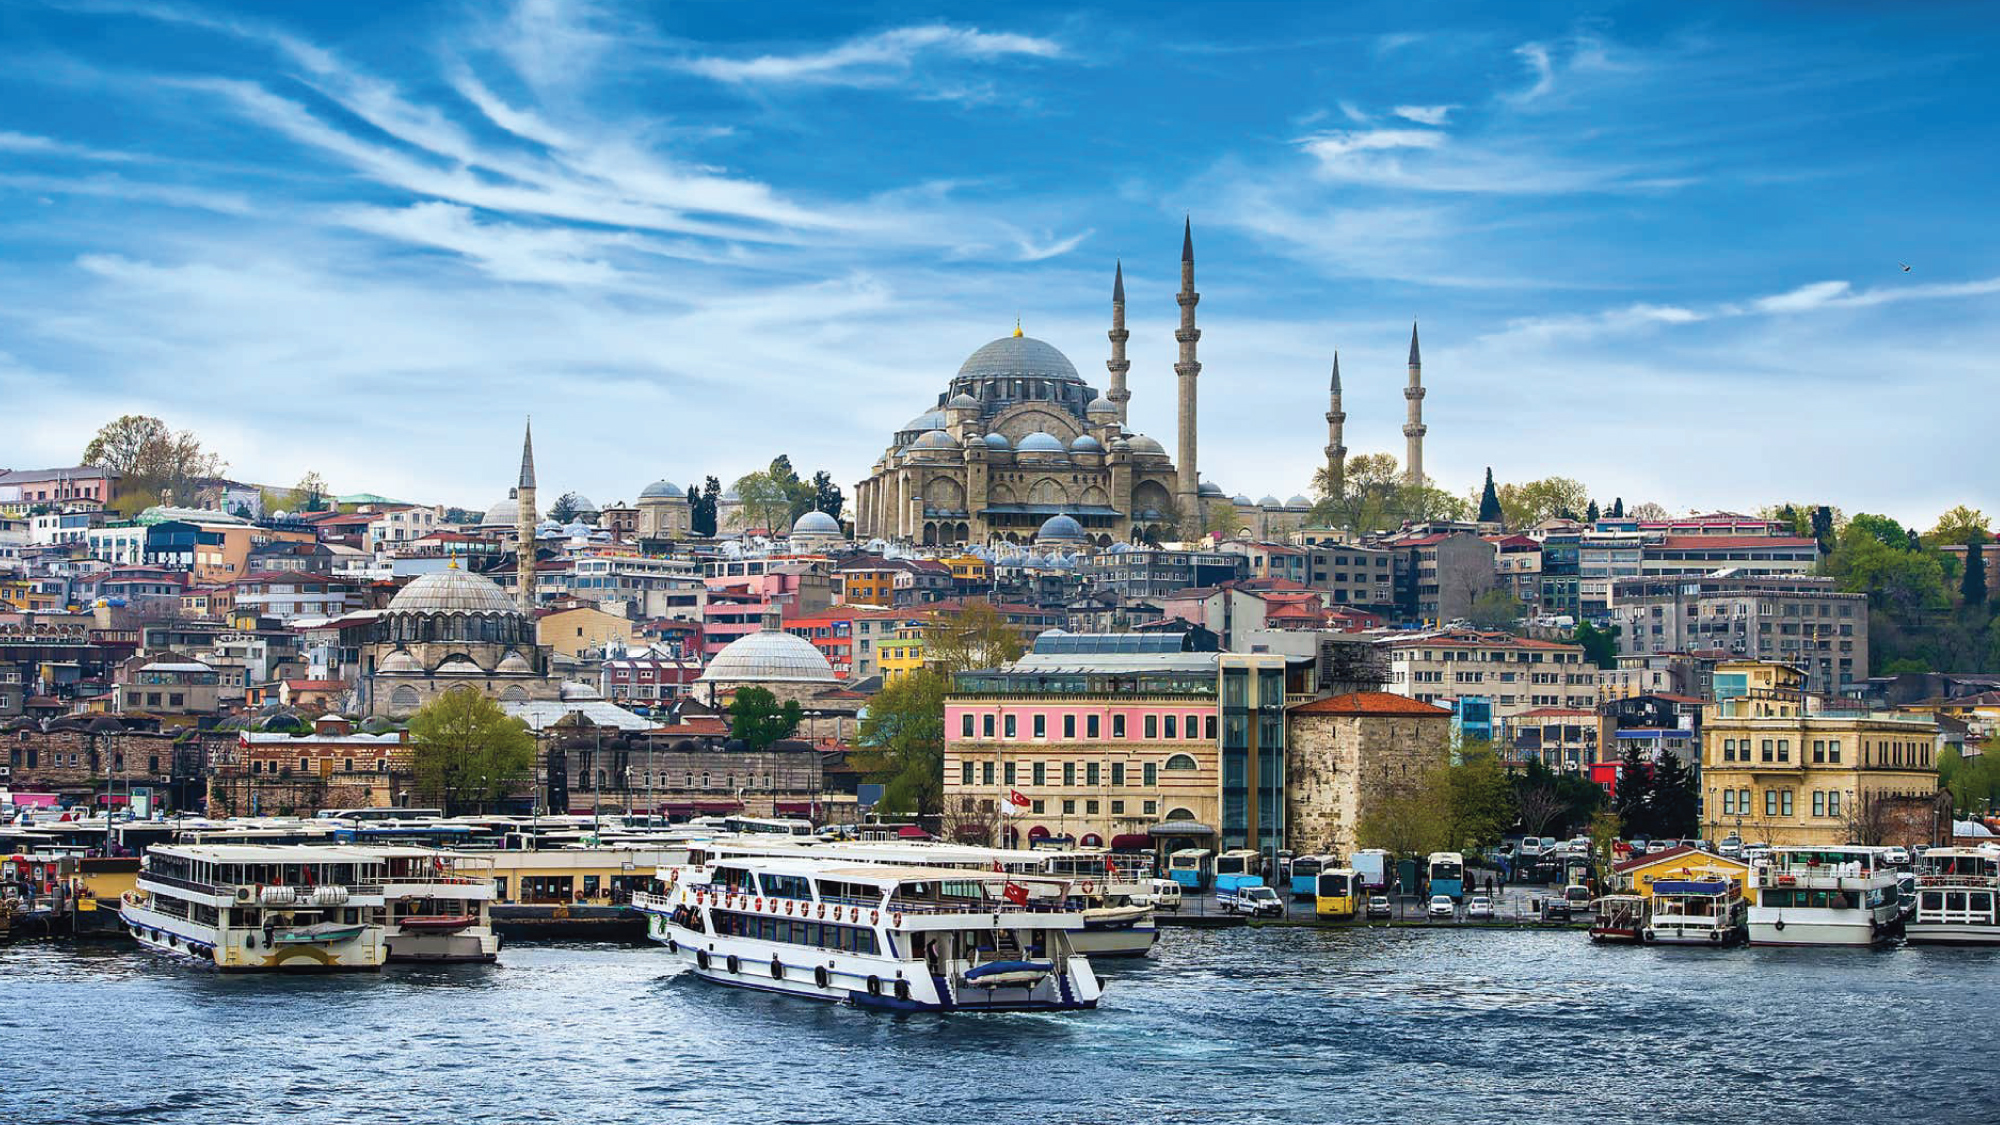 The Bosphorus strait with boats and historic landmarks.